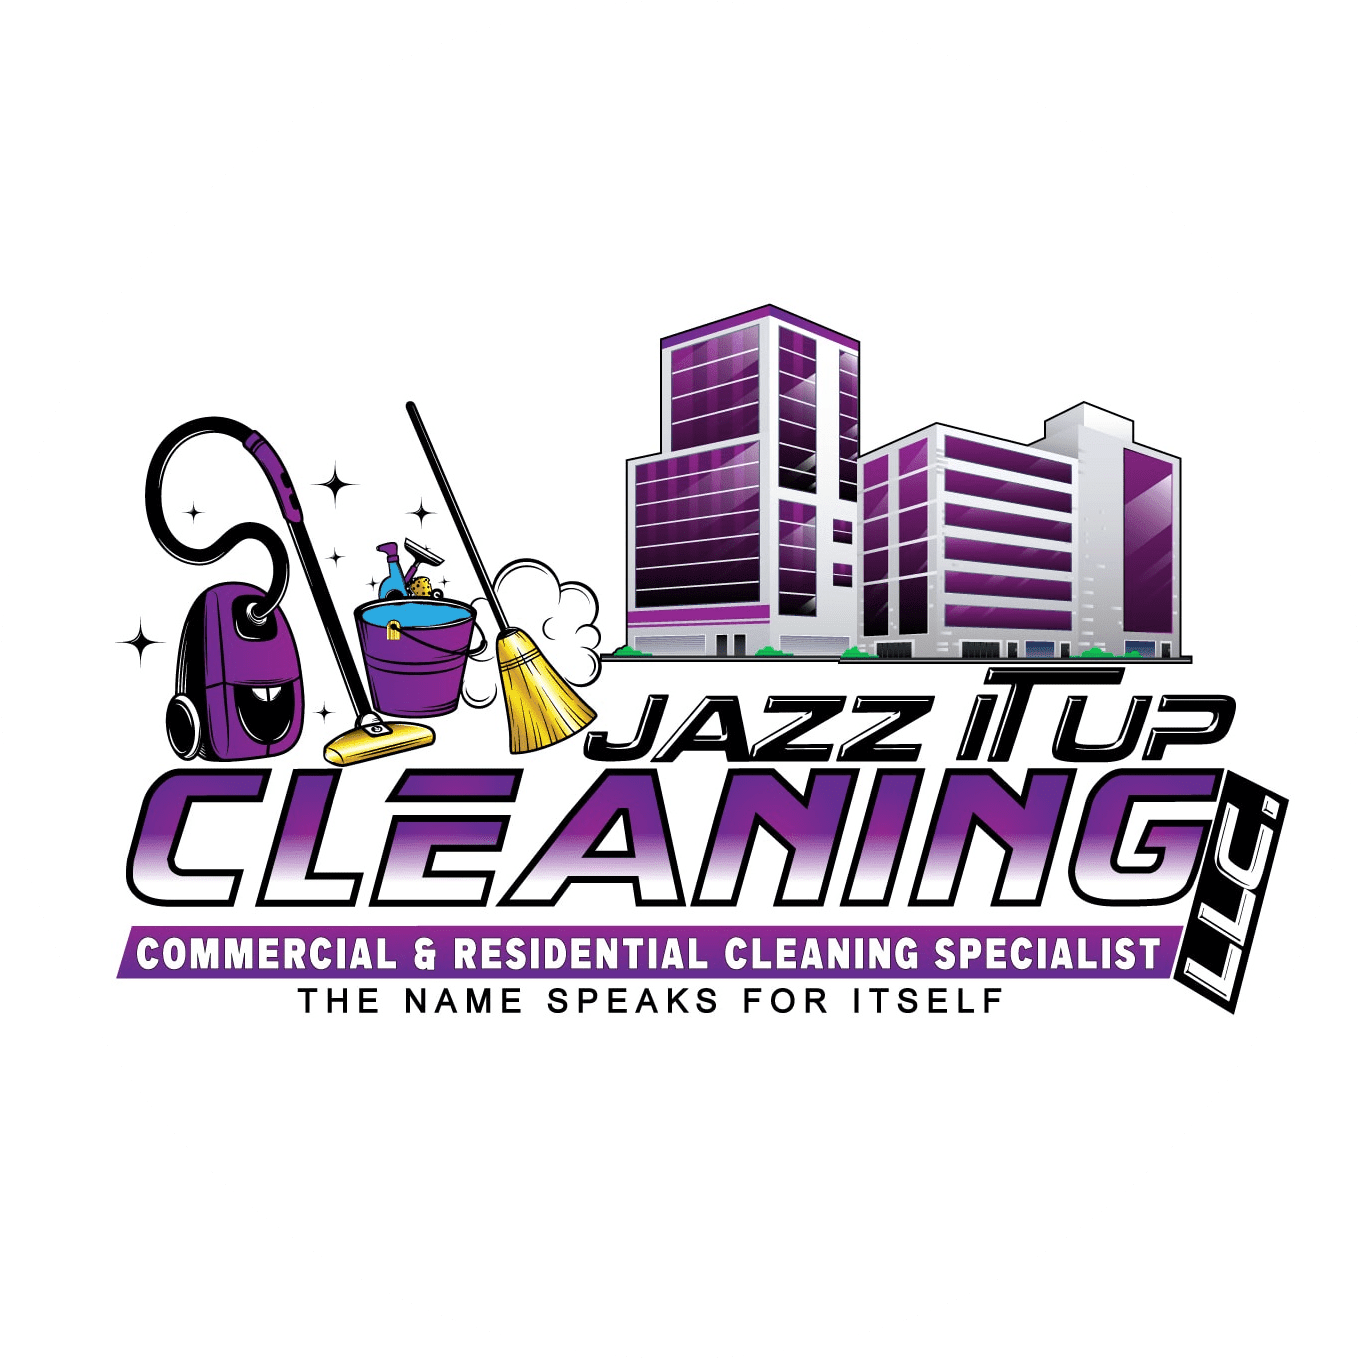 Jazz It Up Cleaning LLC